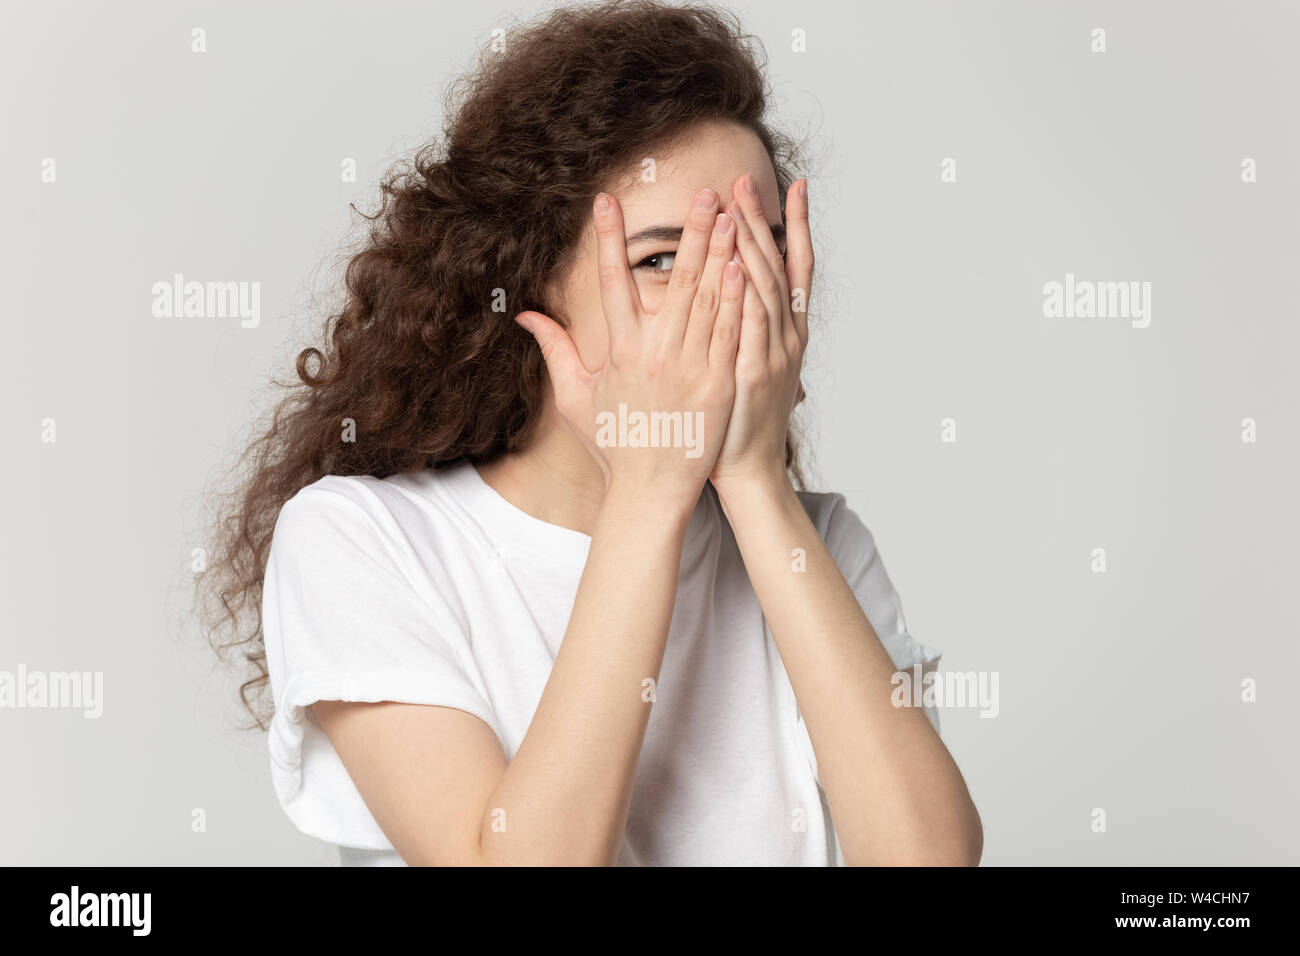 Sly girl hiding face behind hands peeps through fingers Stock Photo